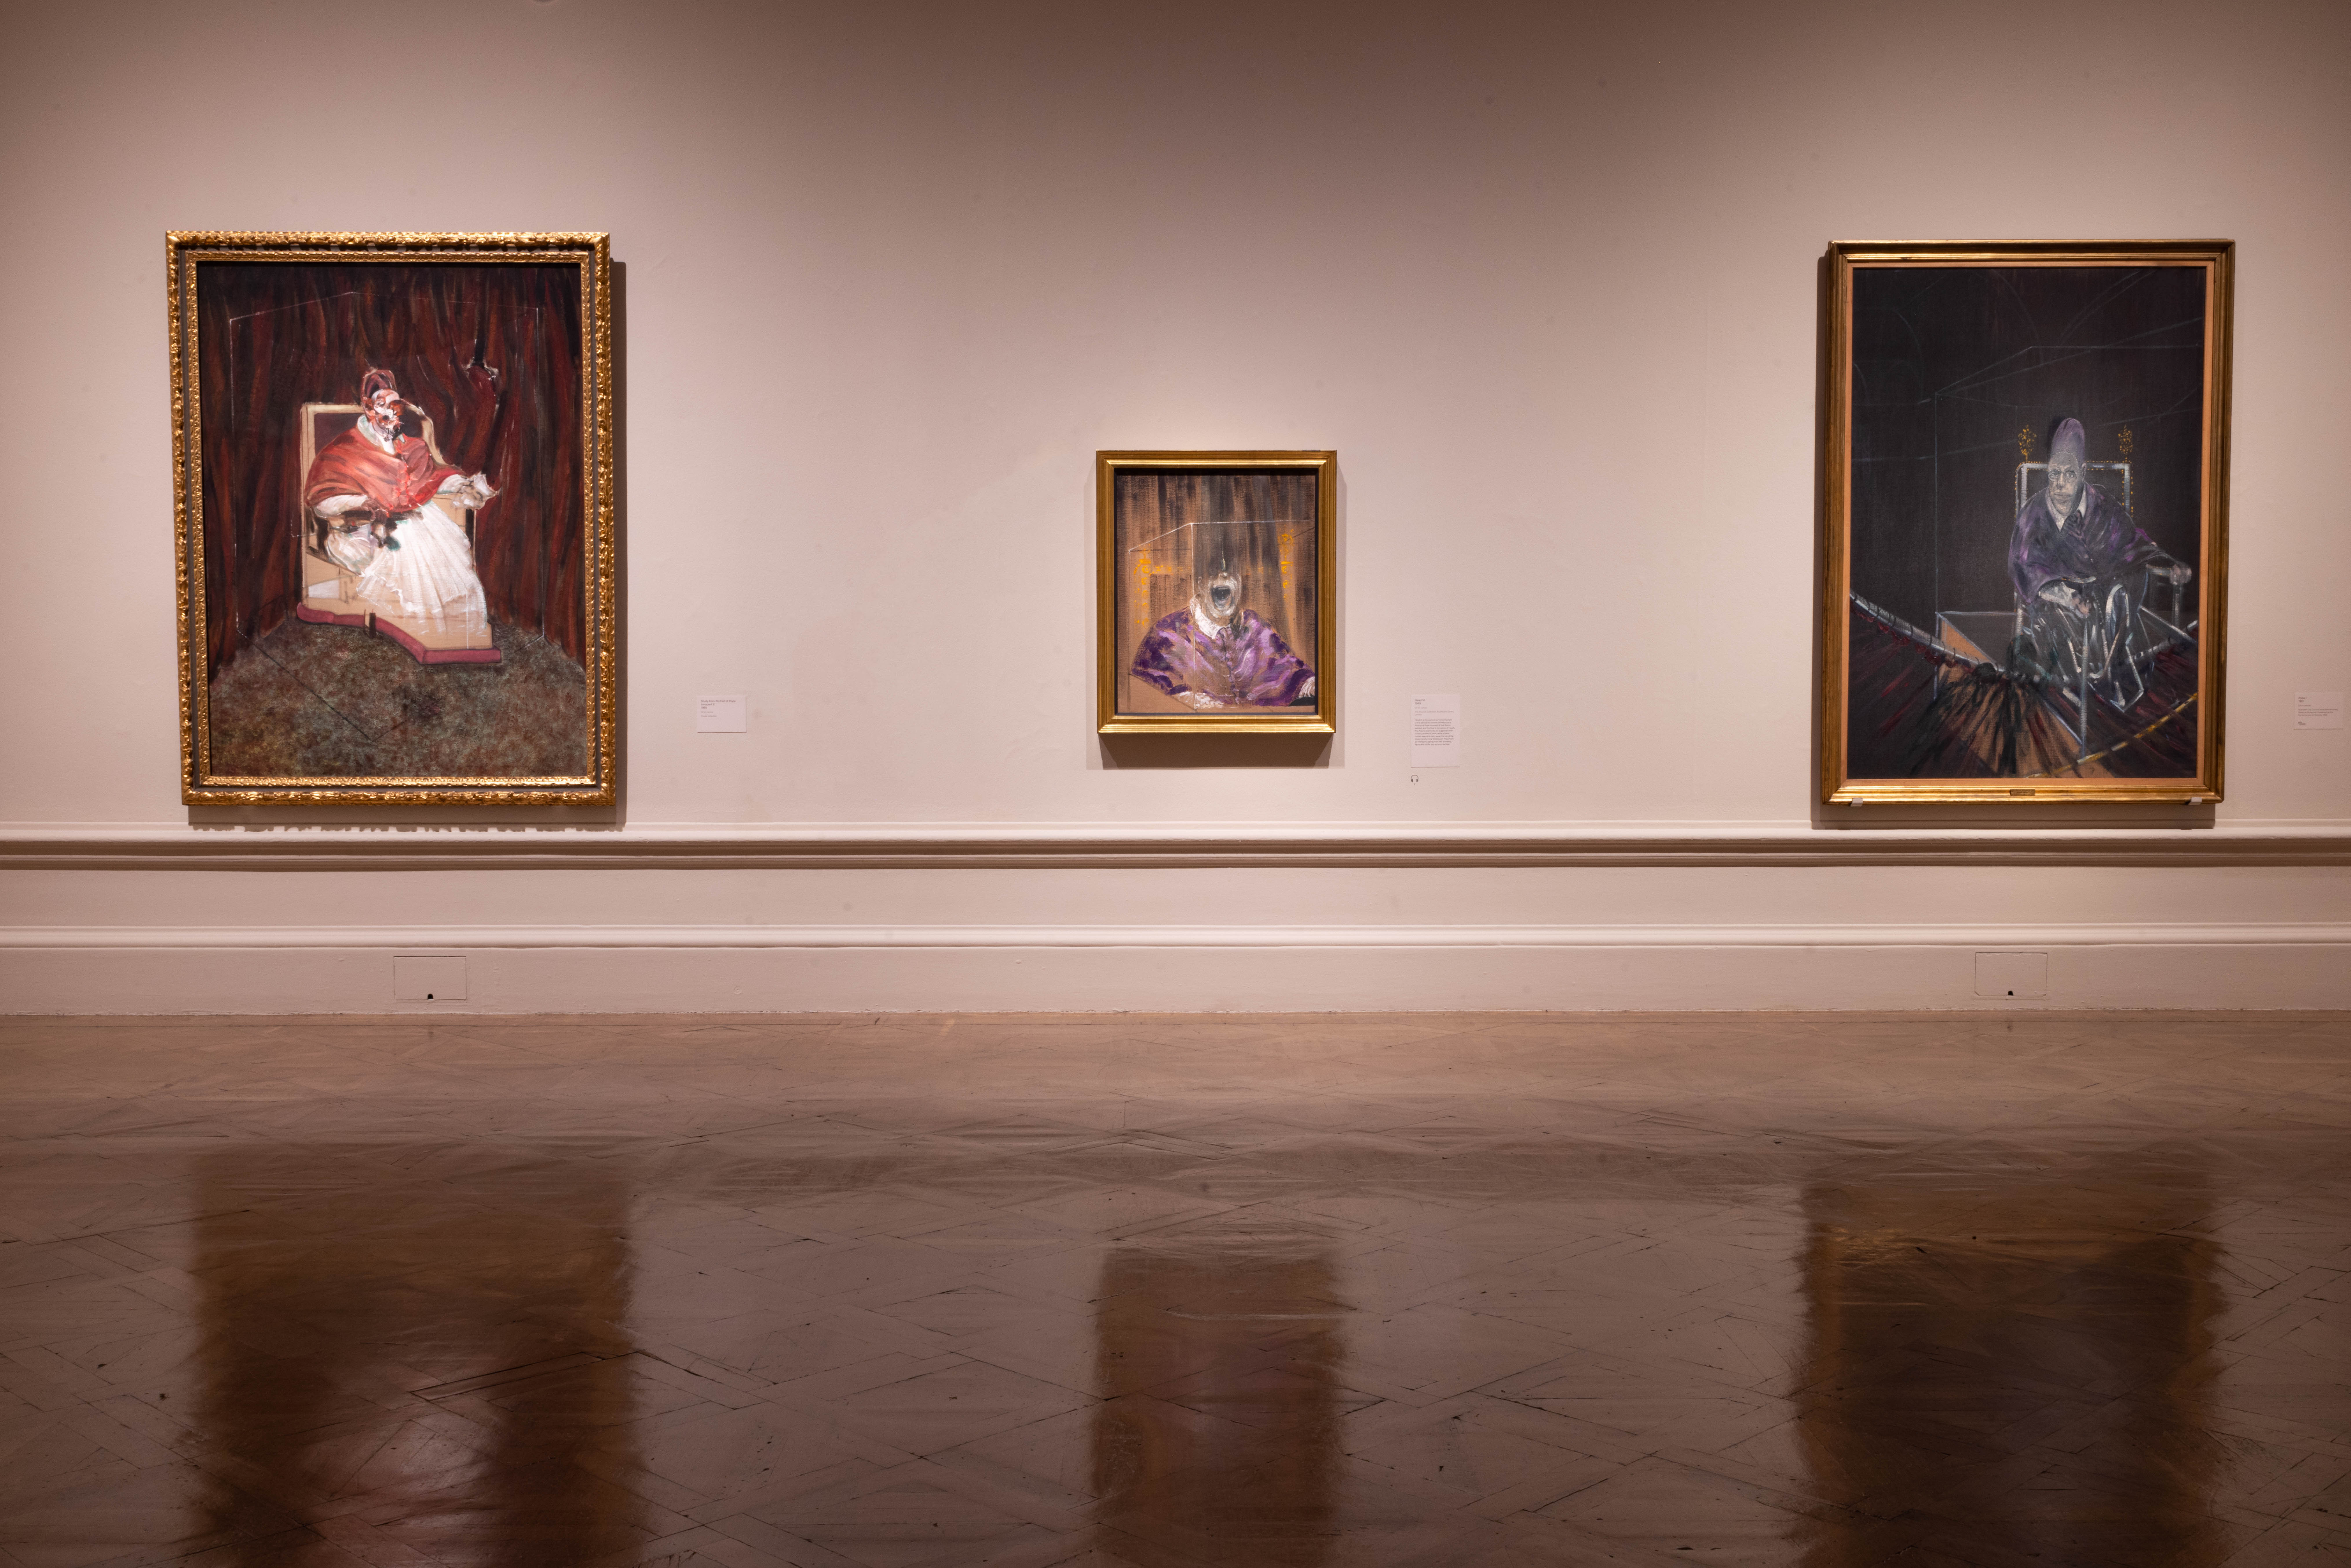 Installation view of the ‘Francis Bacon: Man and Beast’ exhibition at the Royal